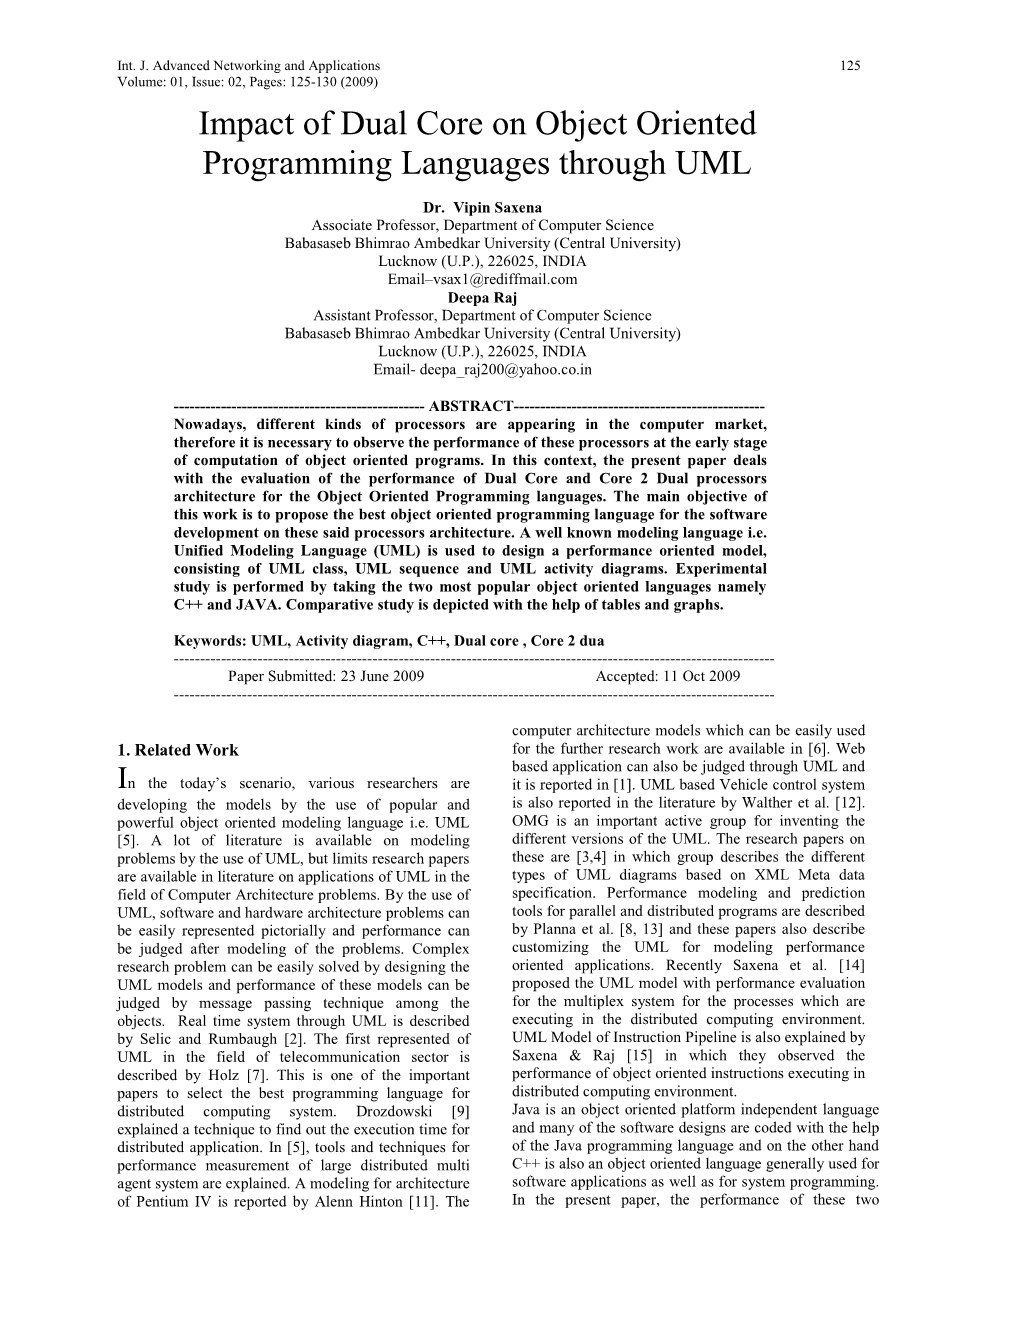 Impact of Dual Core on Object Oriented Programming Languages Through UML